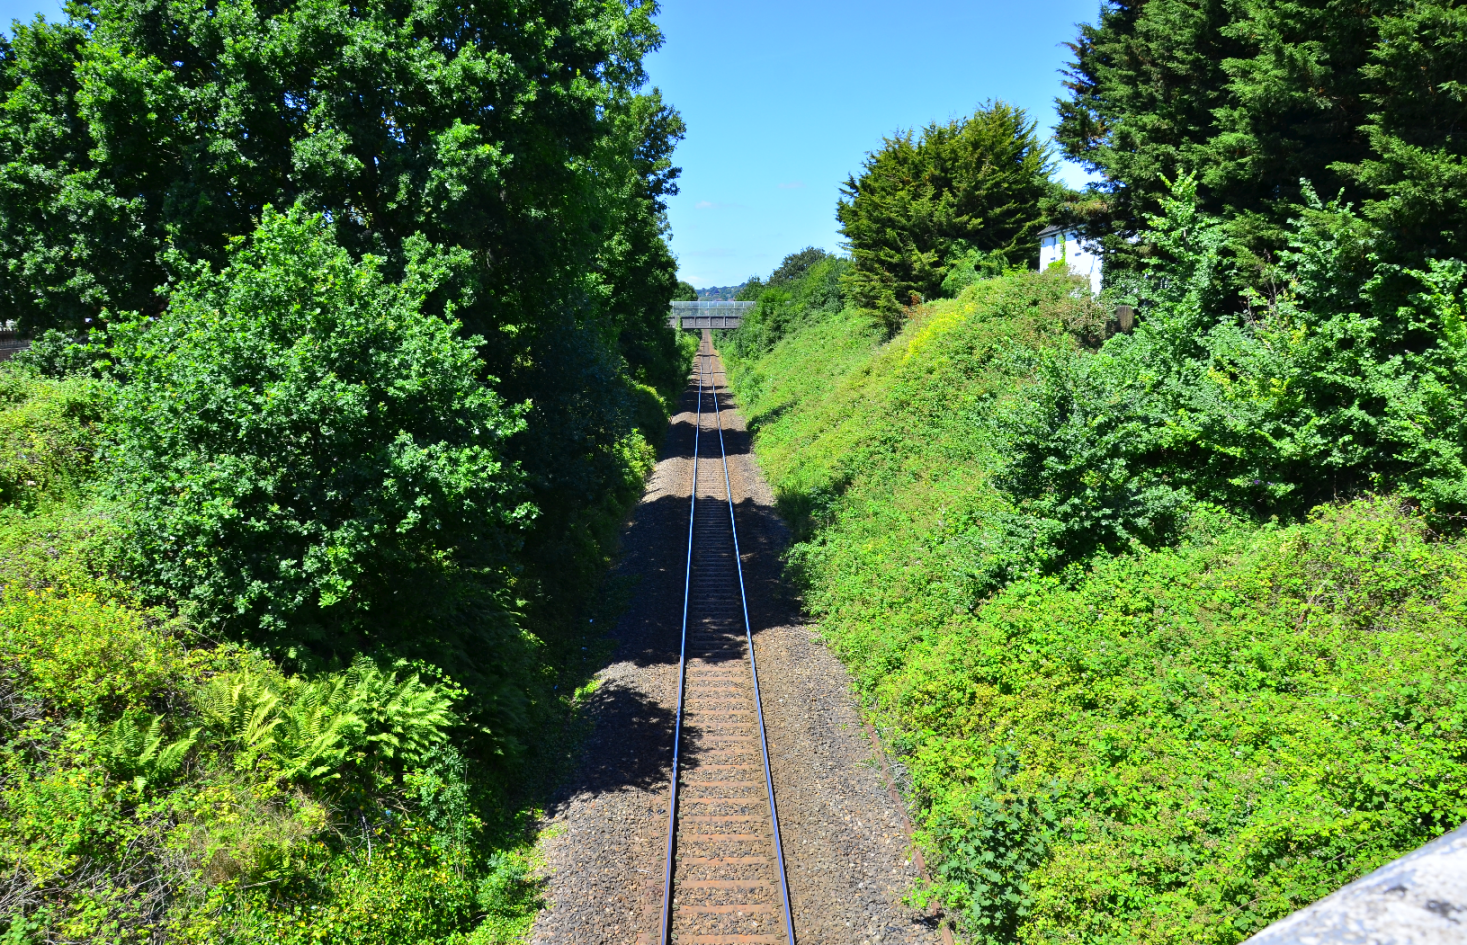 Straight section of railway track